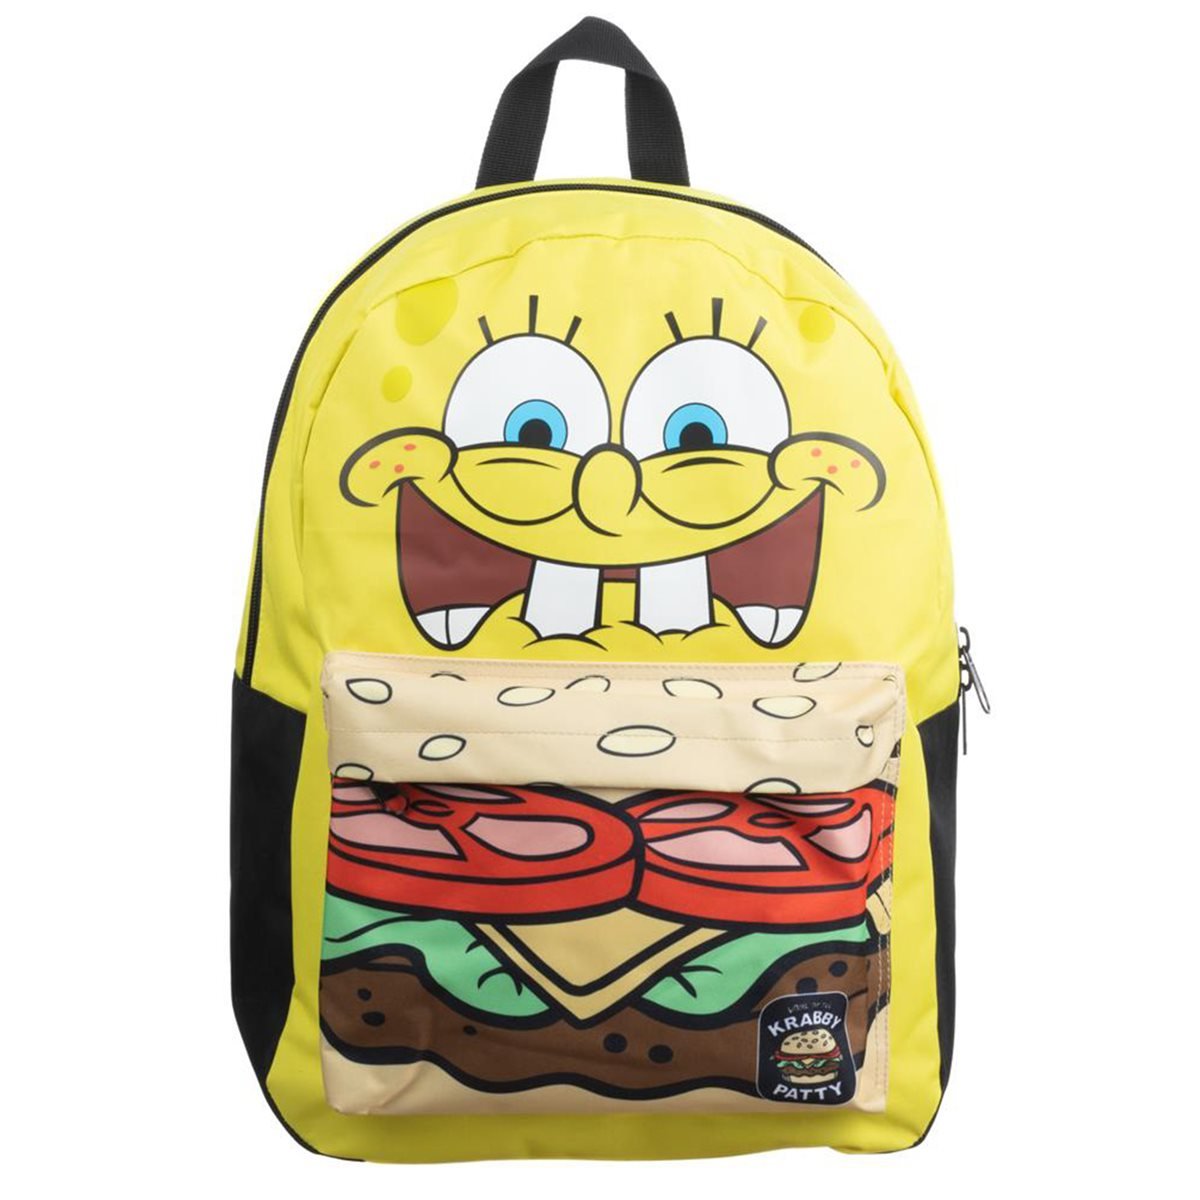 SpongeBob SquarePants Krabby Patty Backpack NEW WITH TAGS Licensed